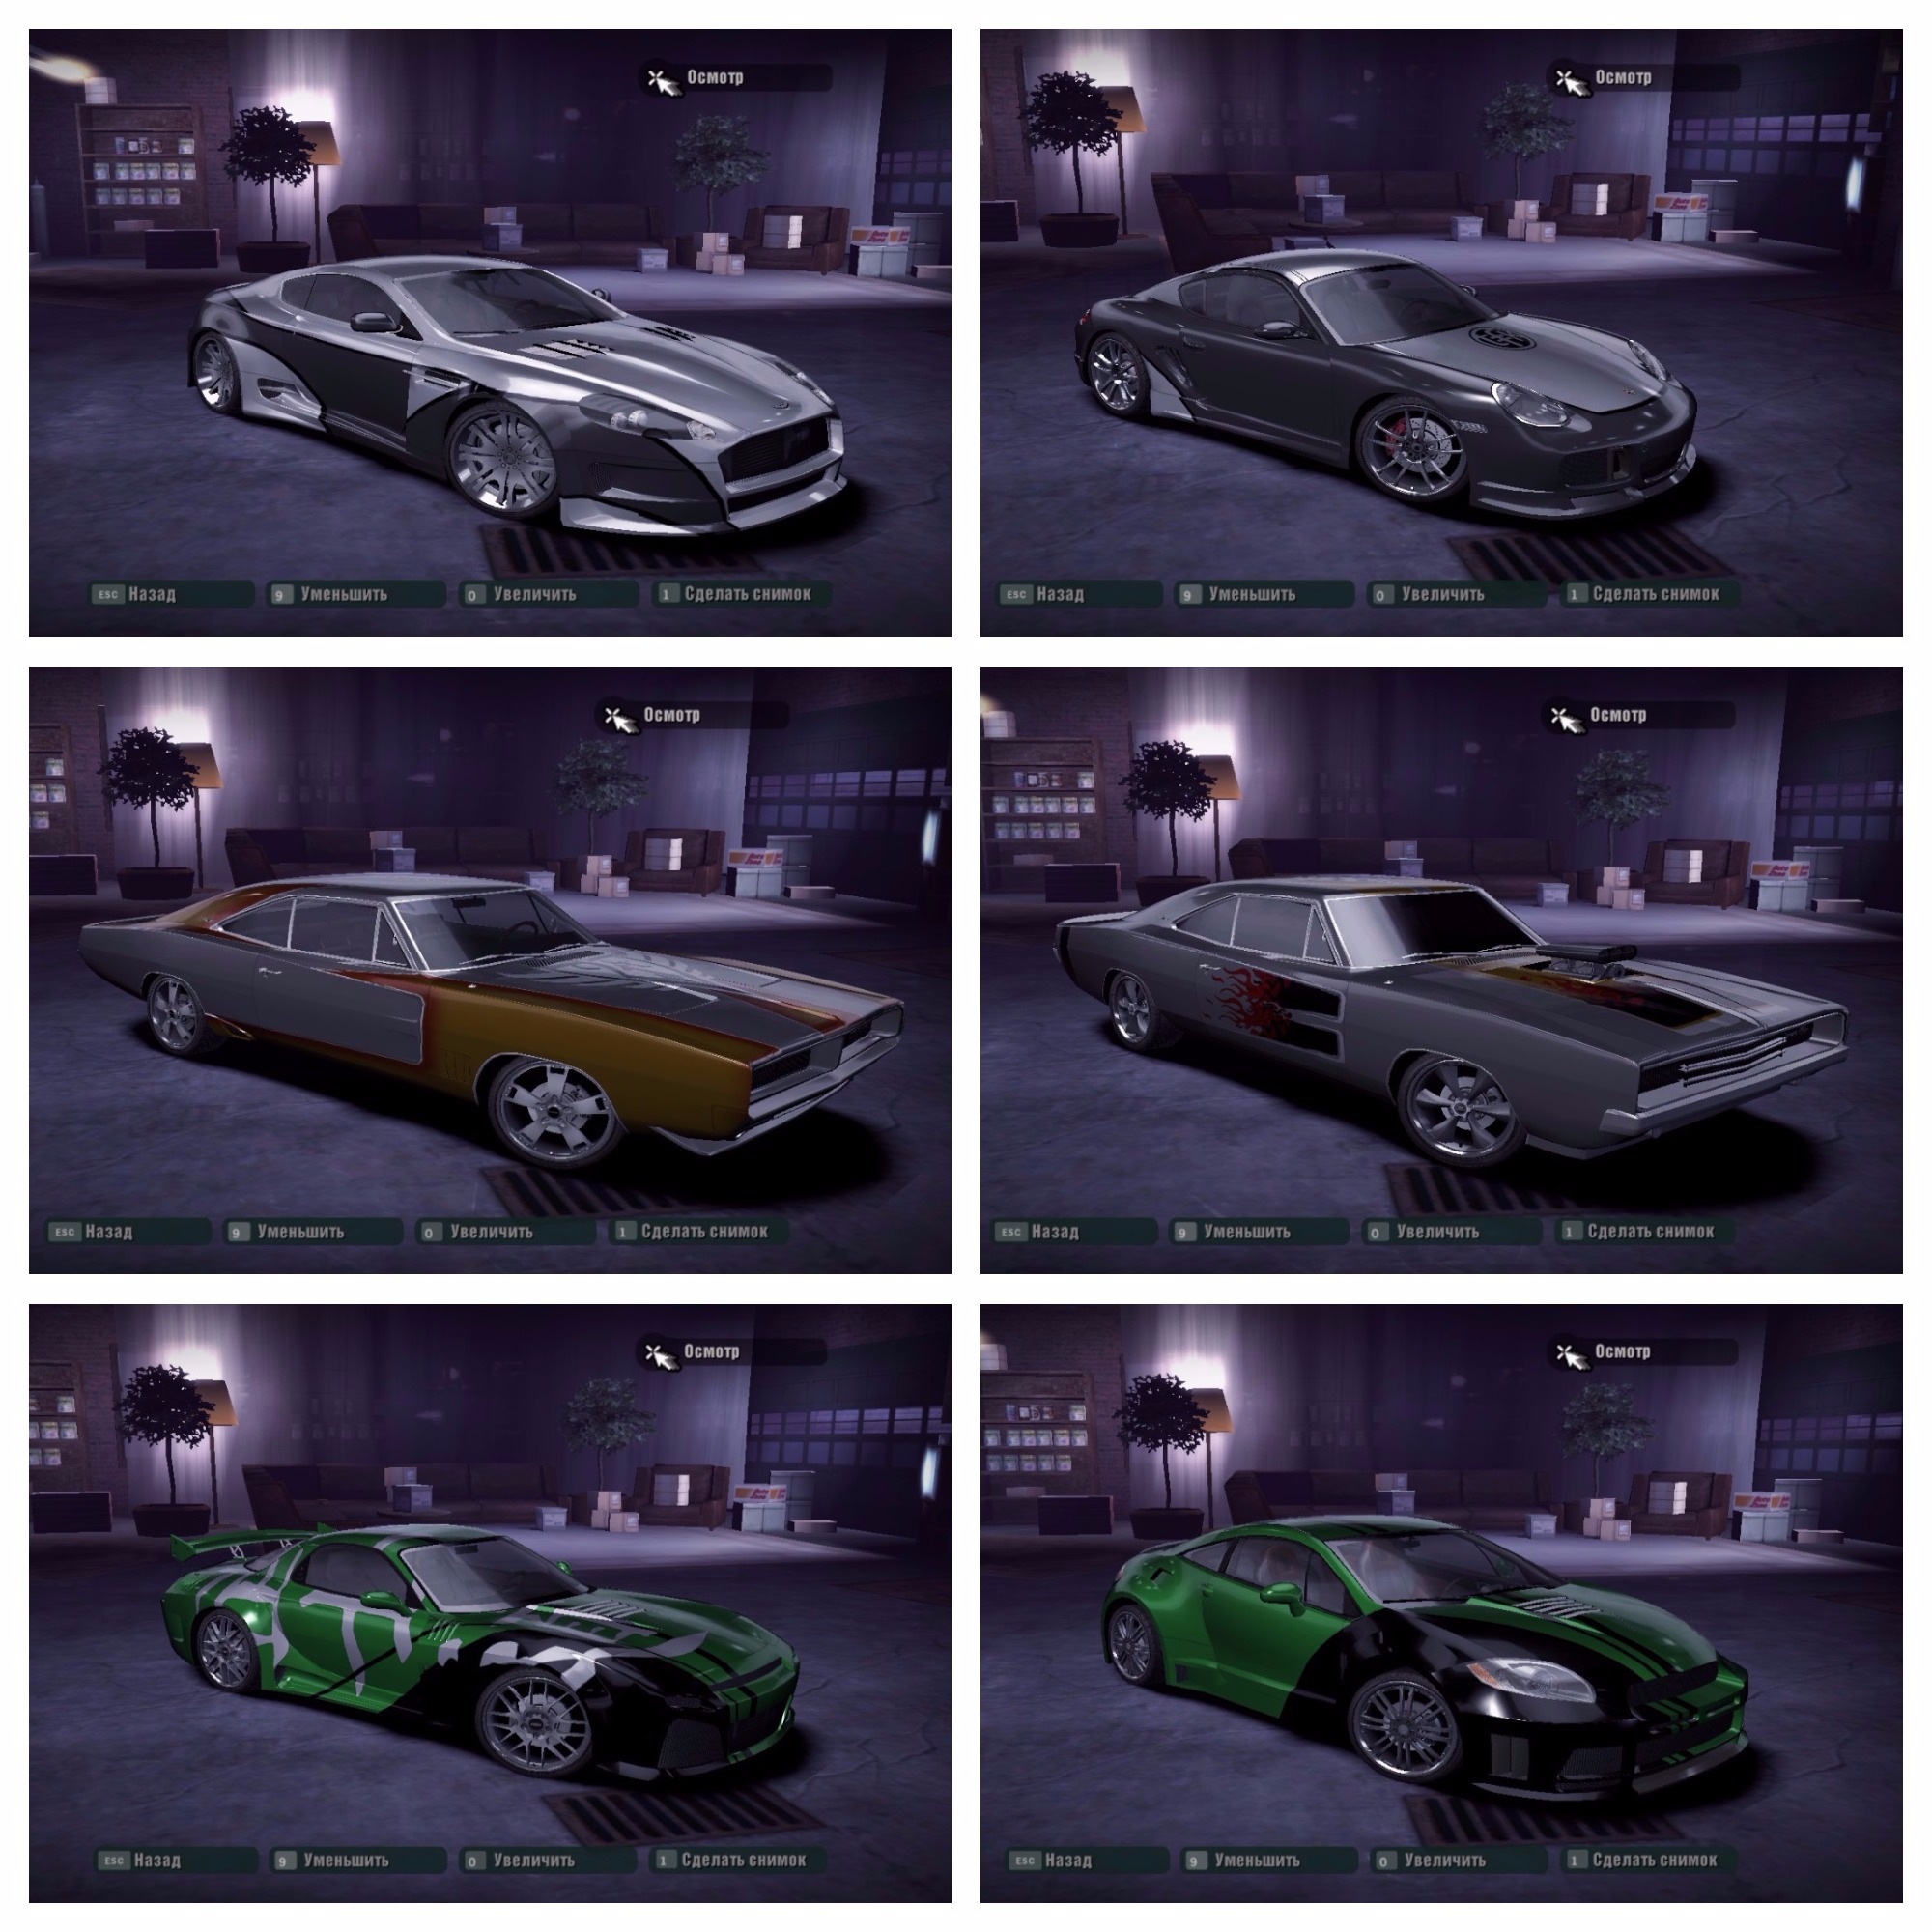 Save Game to Need for Speed: Carbon "Command cars (Angie, Wolf, Kenji, Samson, Yumi, Colin)"